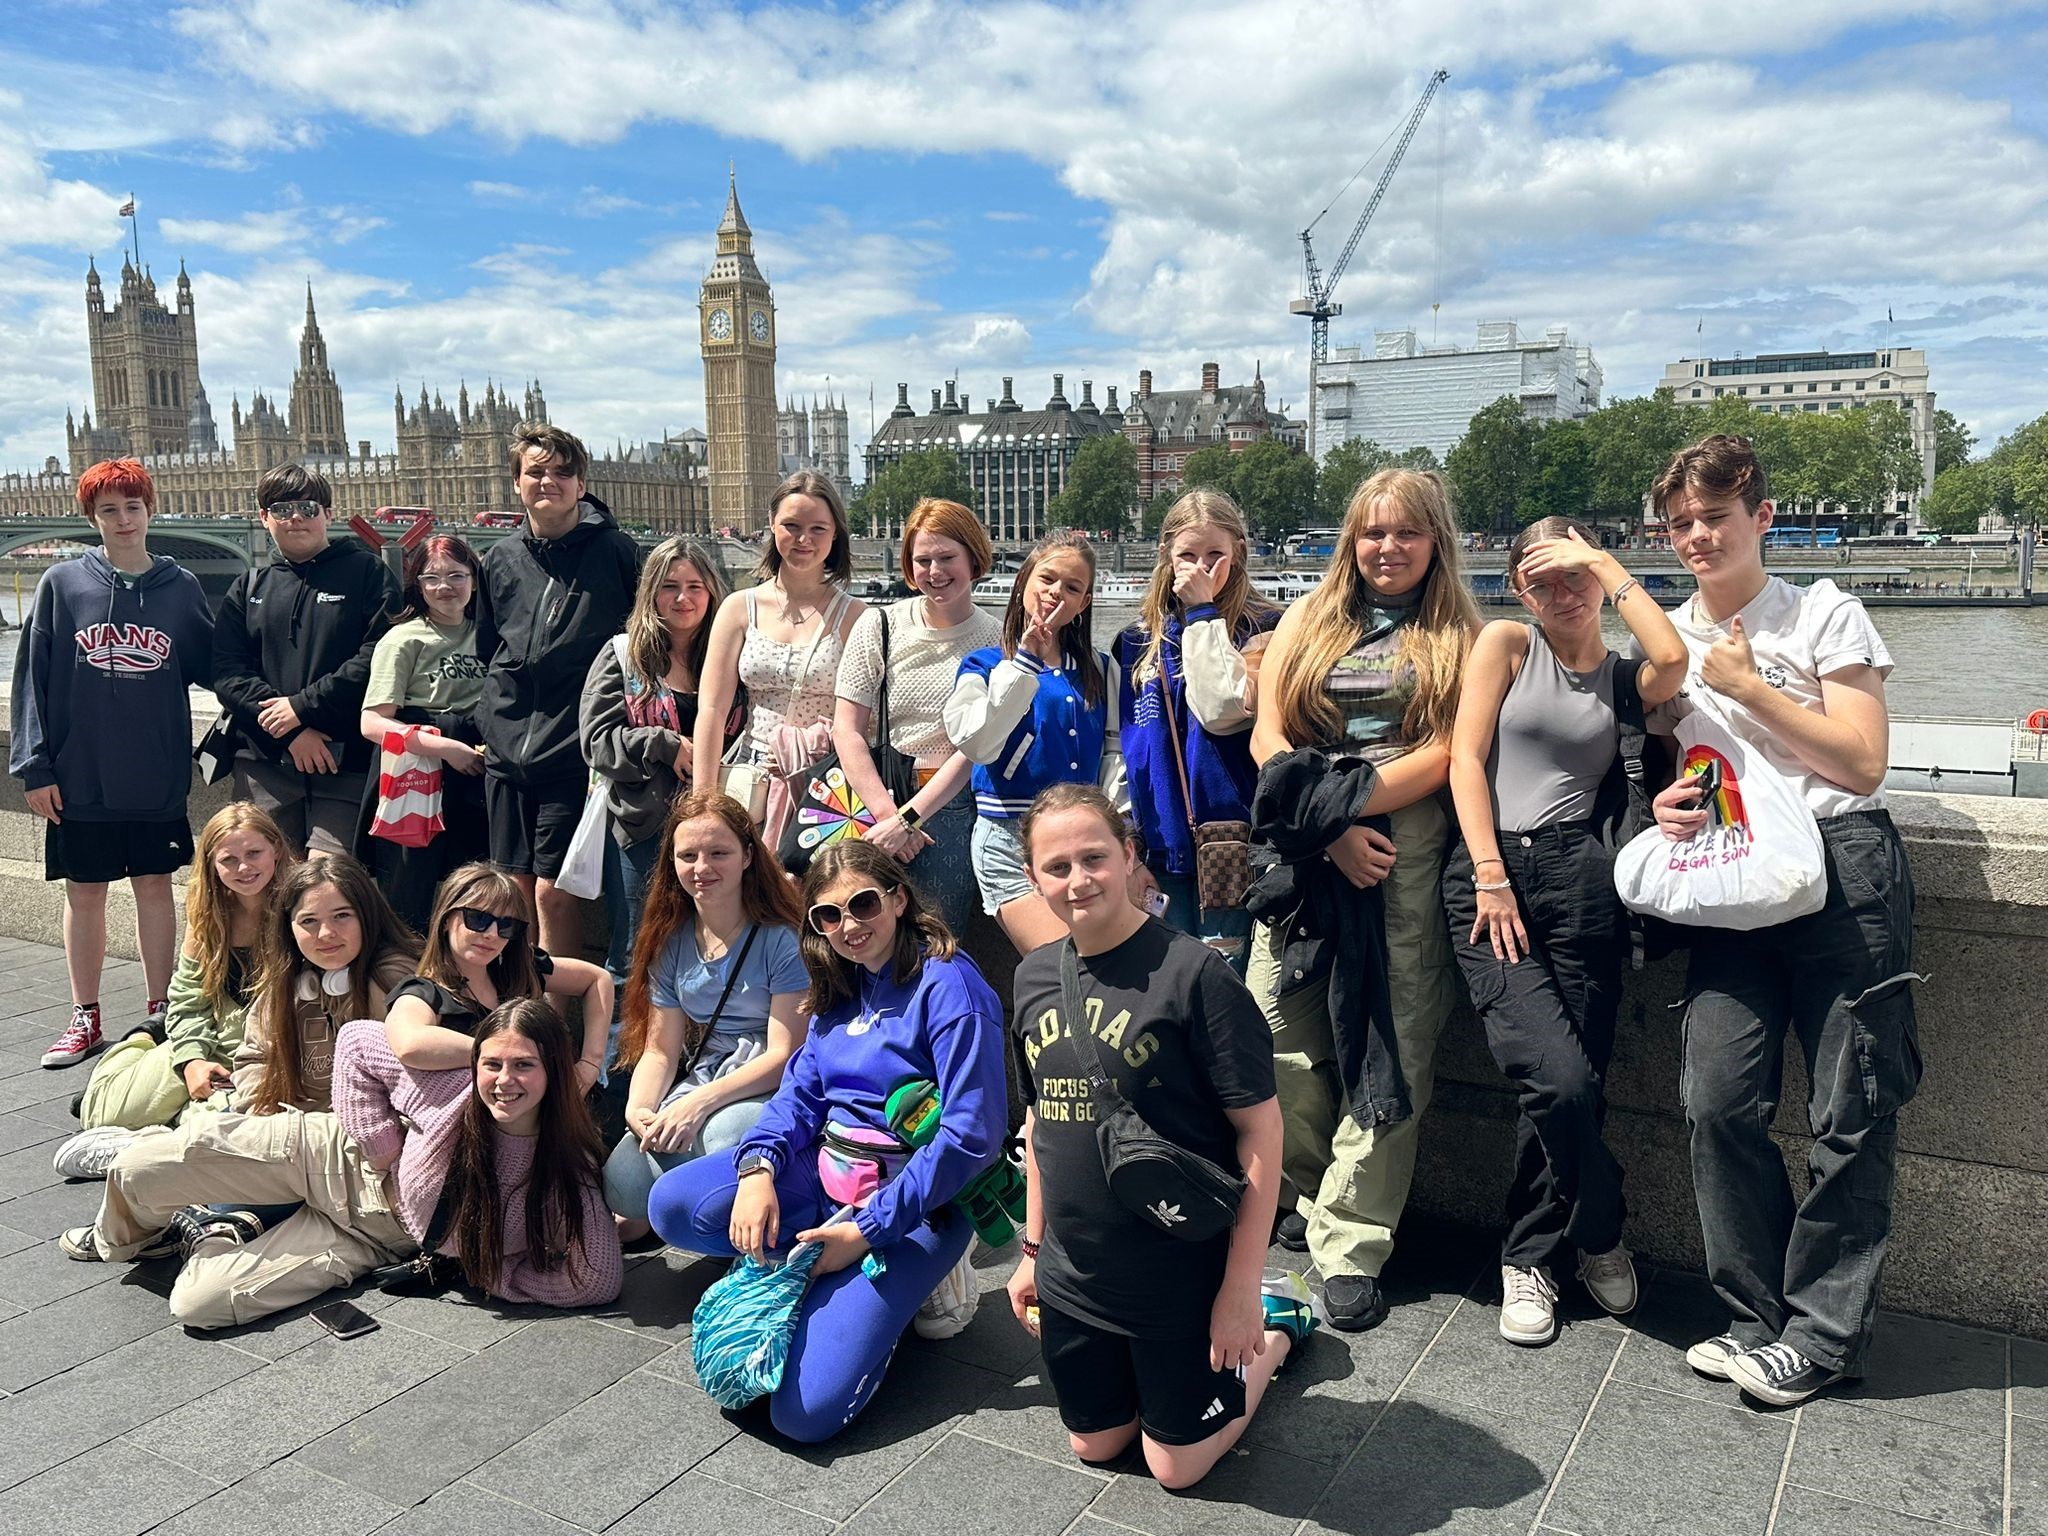 The group of students in London for their theatre trip.